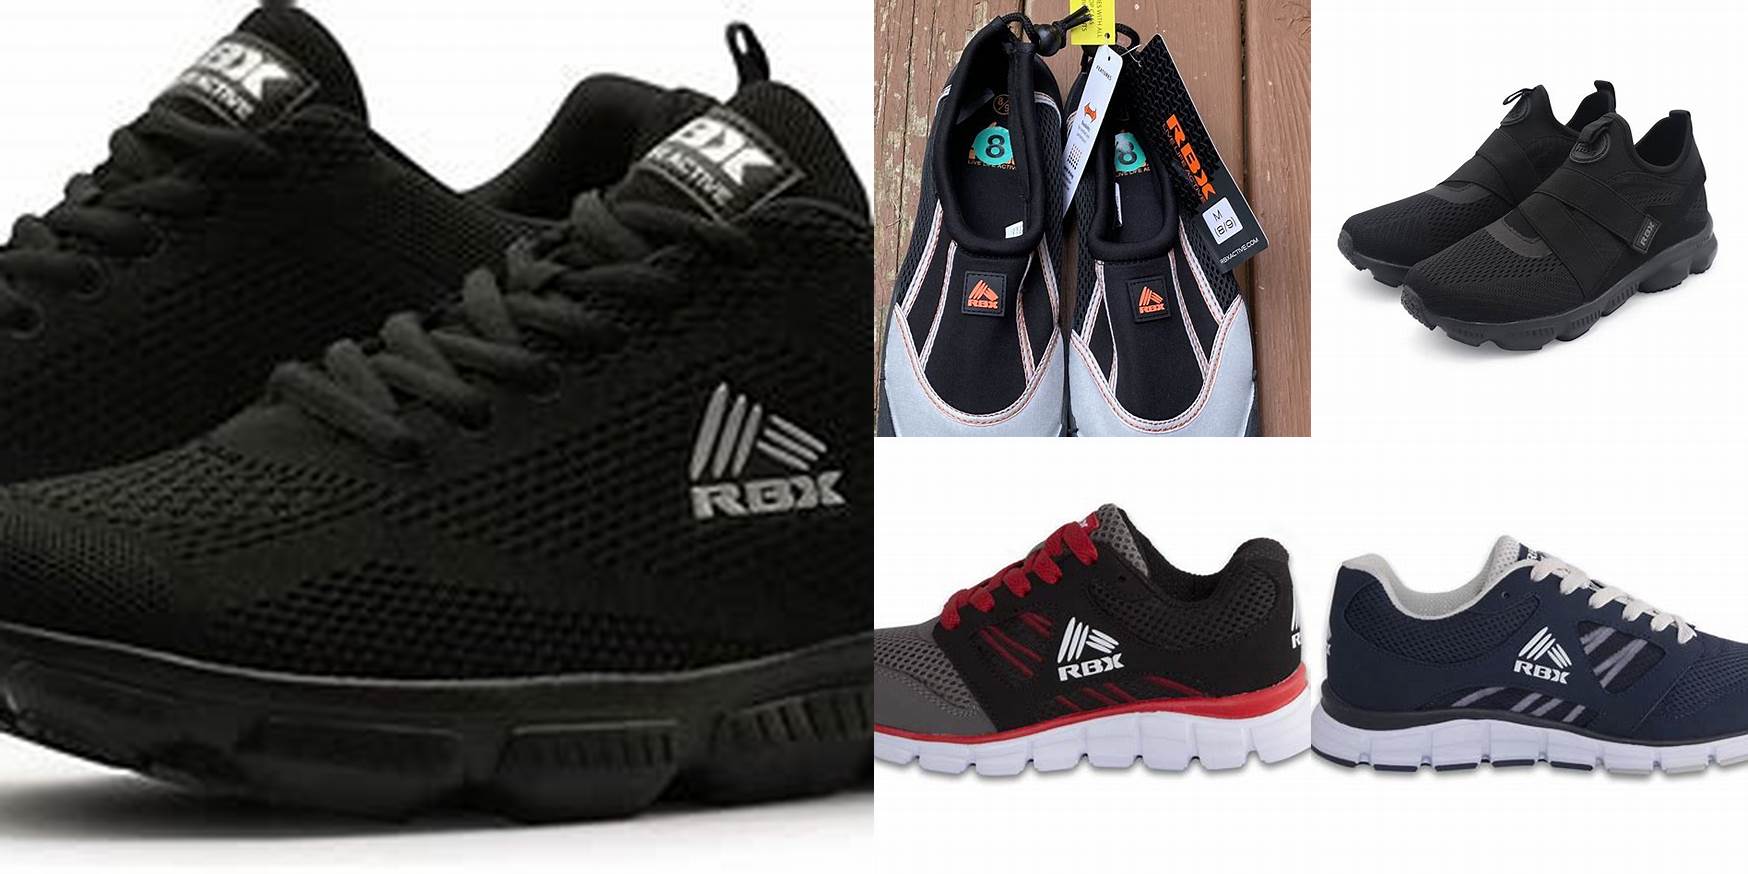 Are Rbx Shoes Slip Resistant